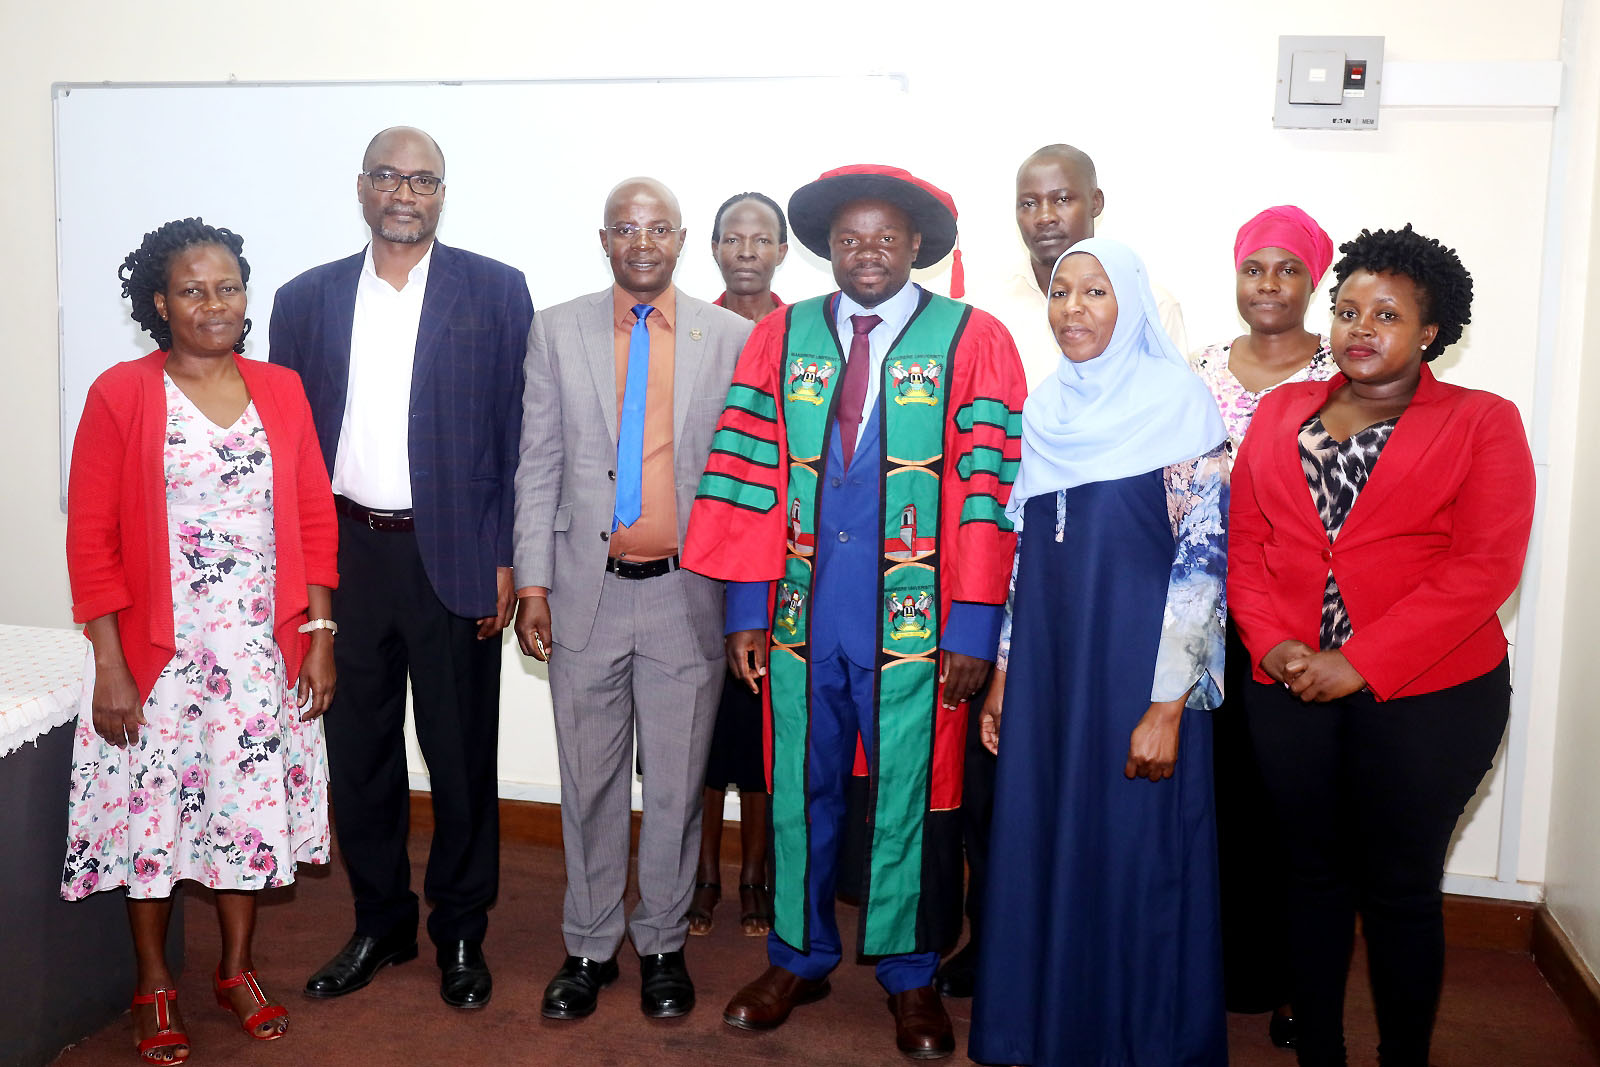 Front Row: Deputy Principal CoBAMS-Prof. Bruno Yawe (2nd L), Prof. Edward Bbaale (3rd L) and Prof. Ibrahim Okumu Mike (4th L) with staff from CoBAMS, the Human Resources Directorate and Internal Audit at the handover ceremony on 16th January 2023 at Makerere University.